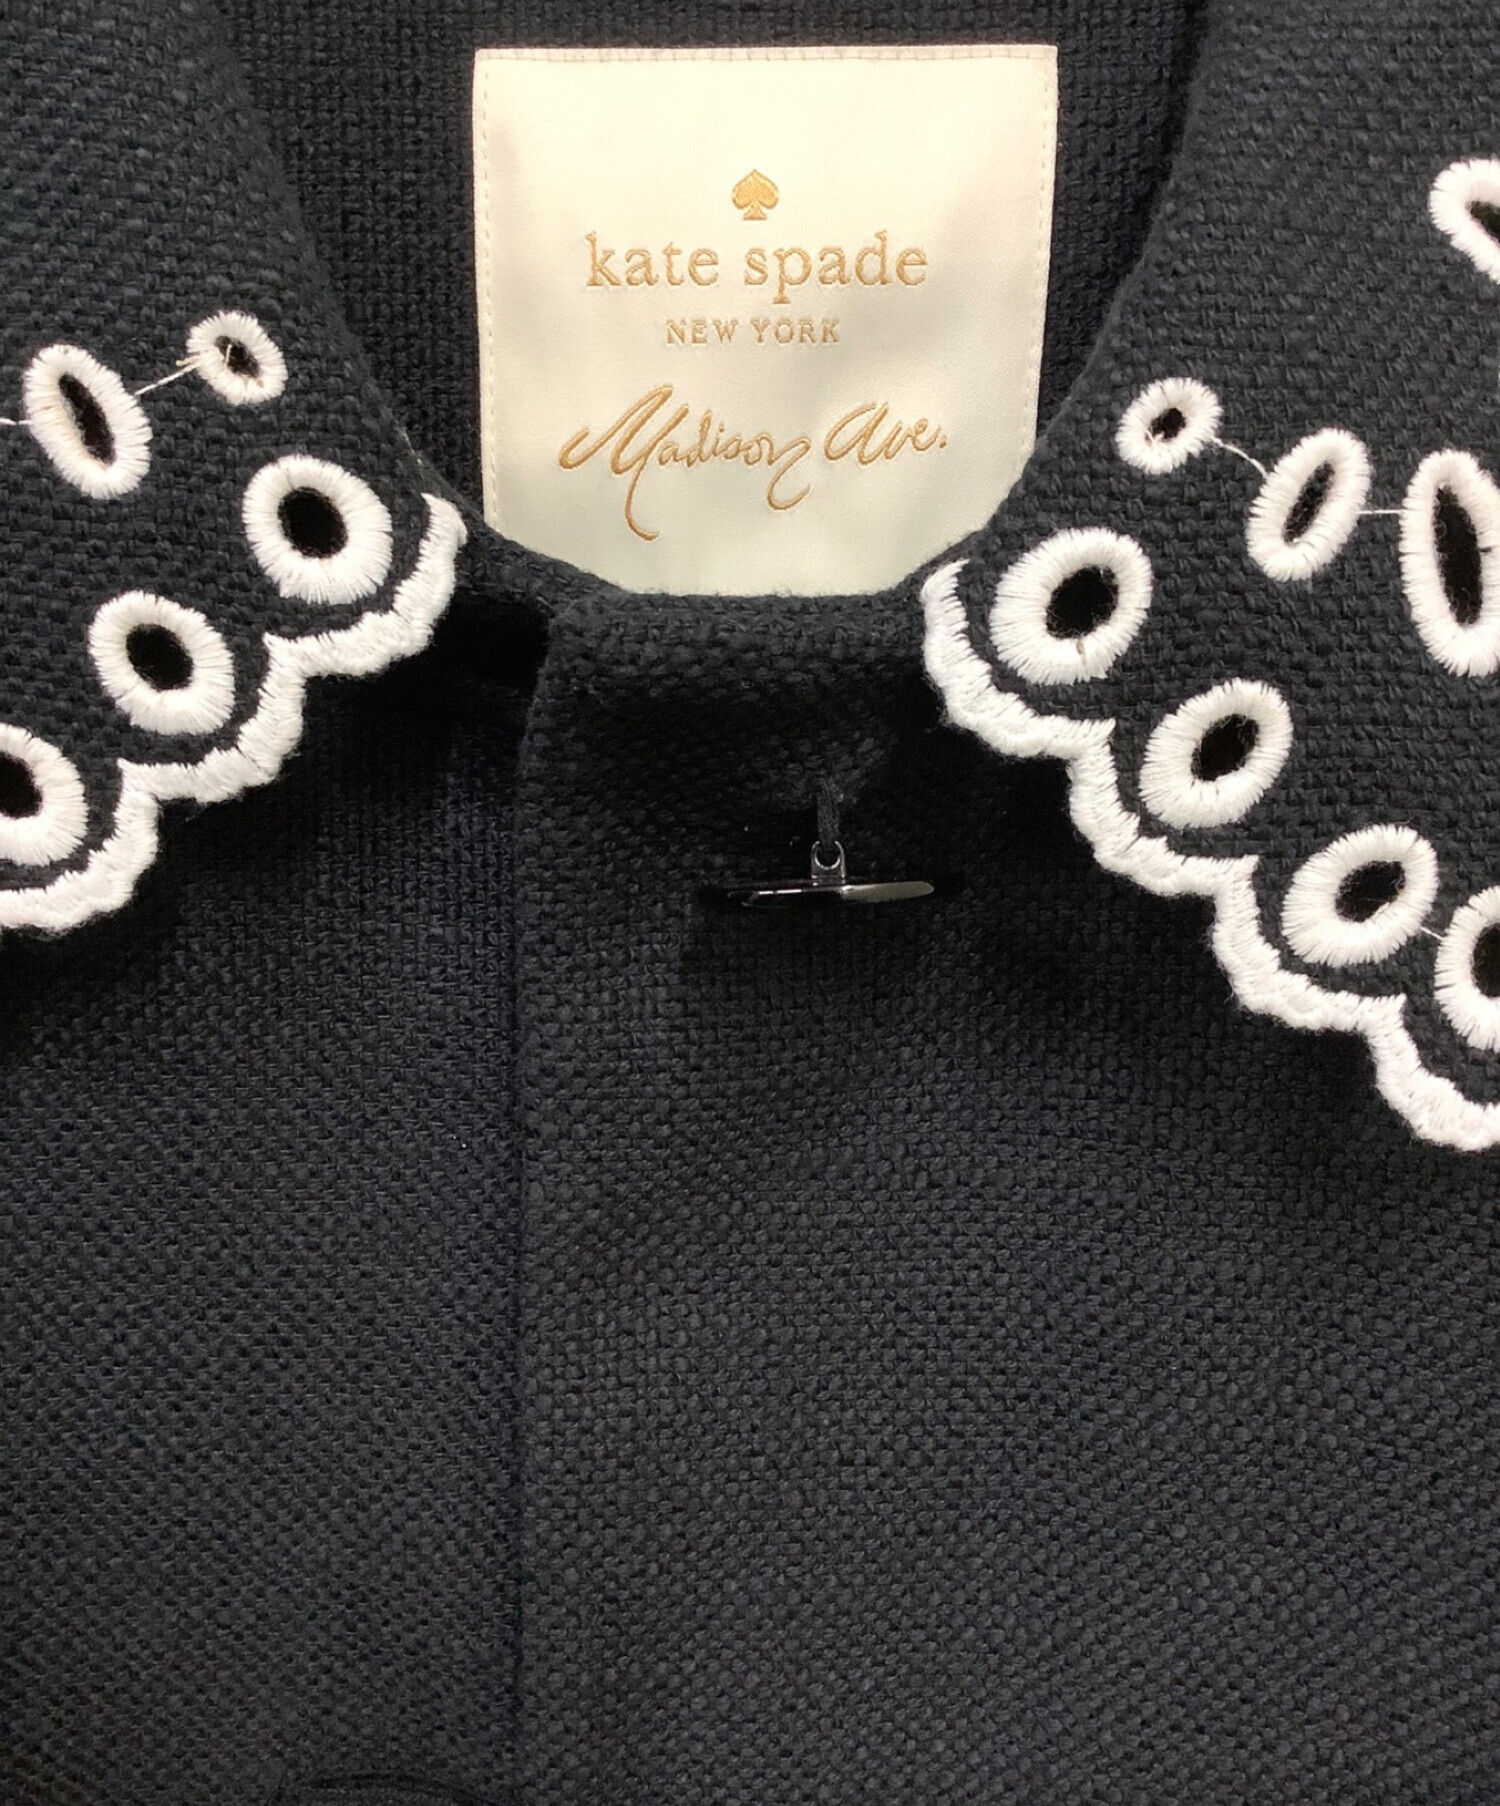 Kate Spade Madison avenue collection (ケイトスペード) Madison avenue collection  ブラック サイズ:S